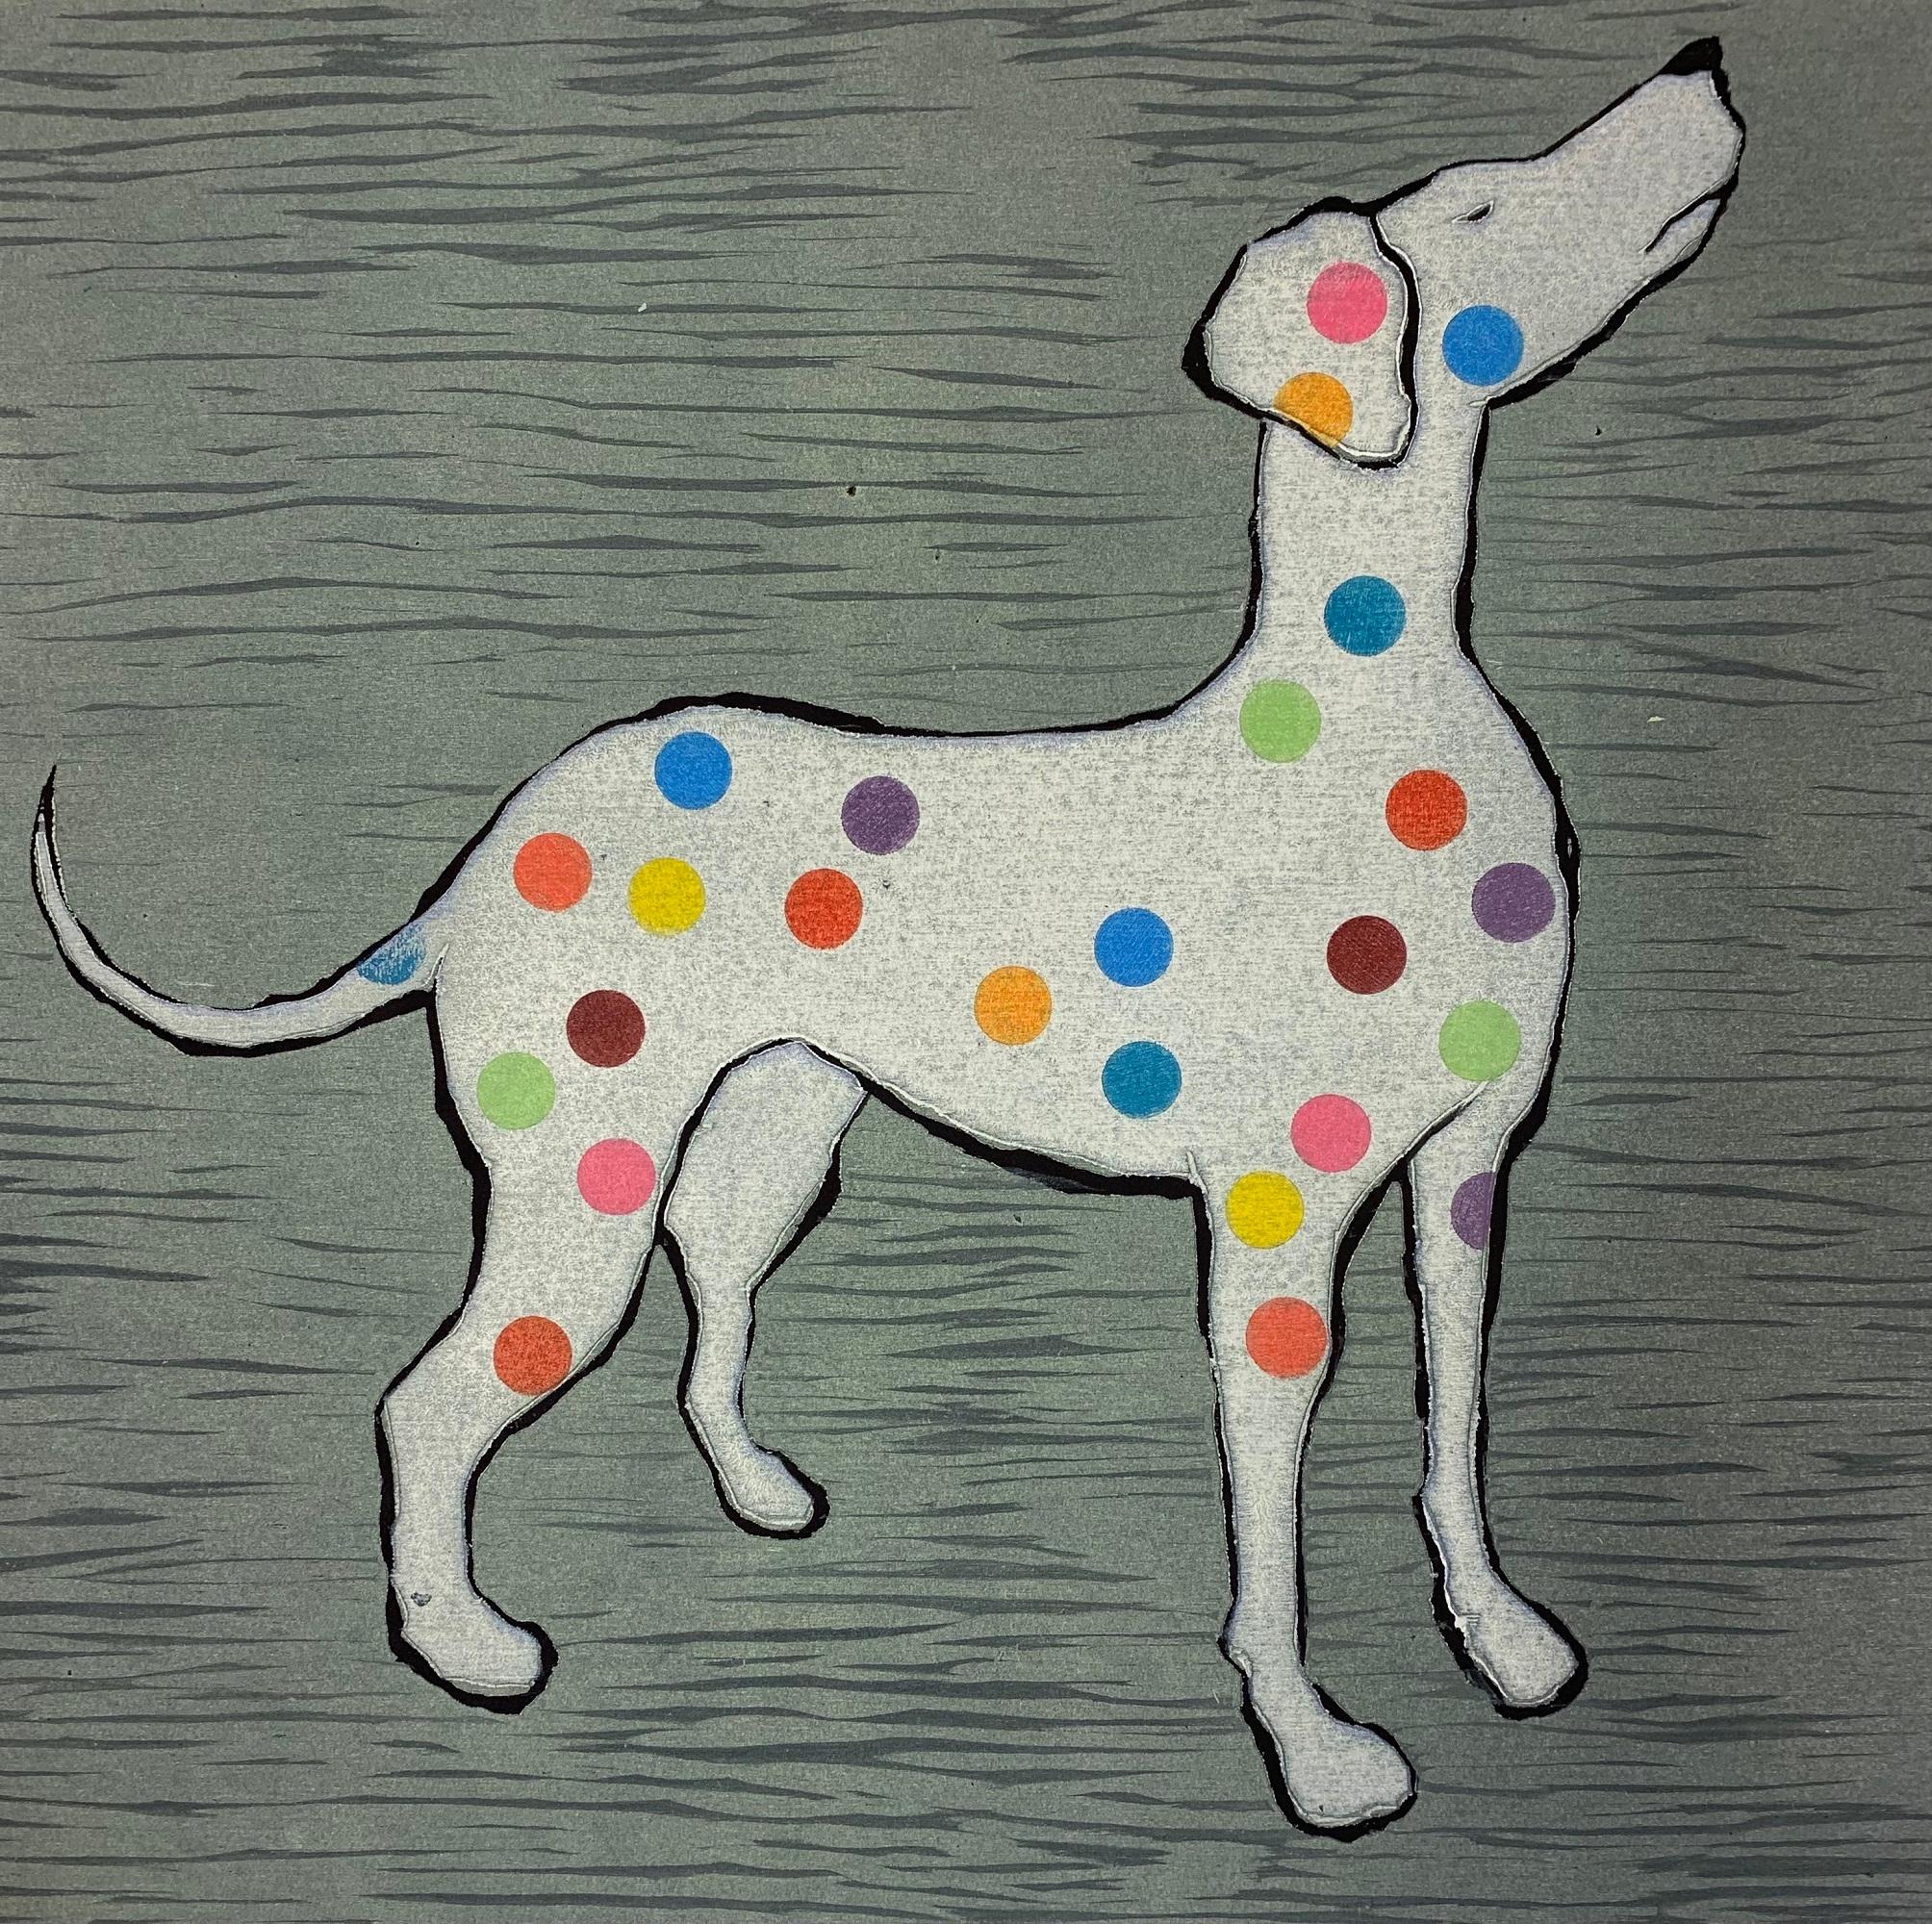 Damien Hirst's Dog, Pictures of Famous Artist's Pets, Damien Hirst Spots Style